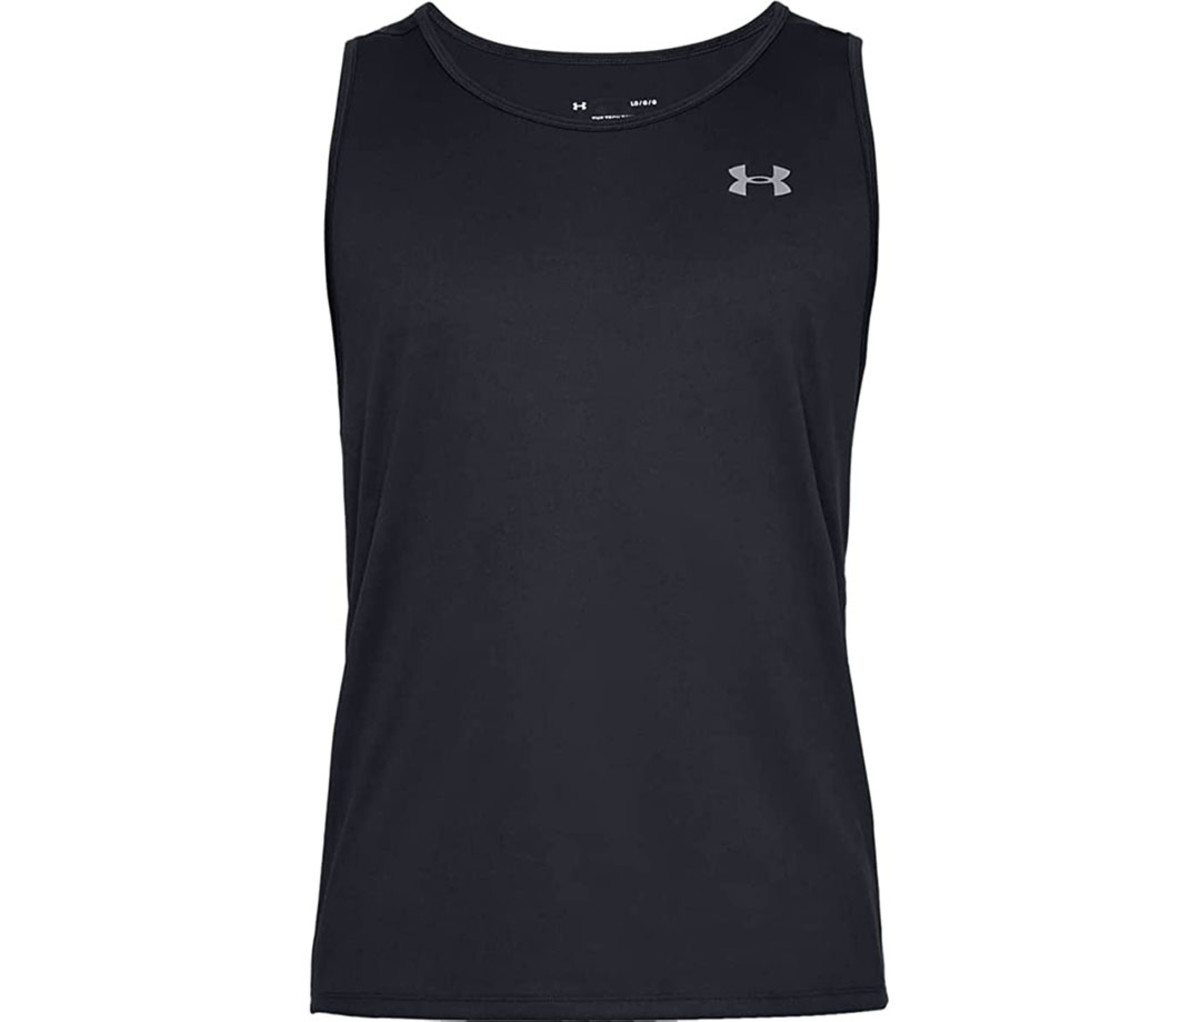 These Prime Day Workout Clothes Deals are Too Good to Pass Up - Men's ...